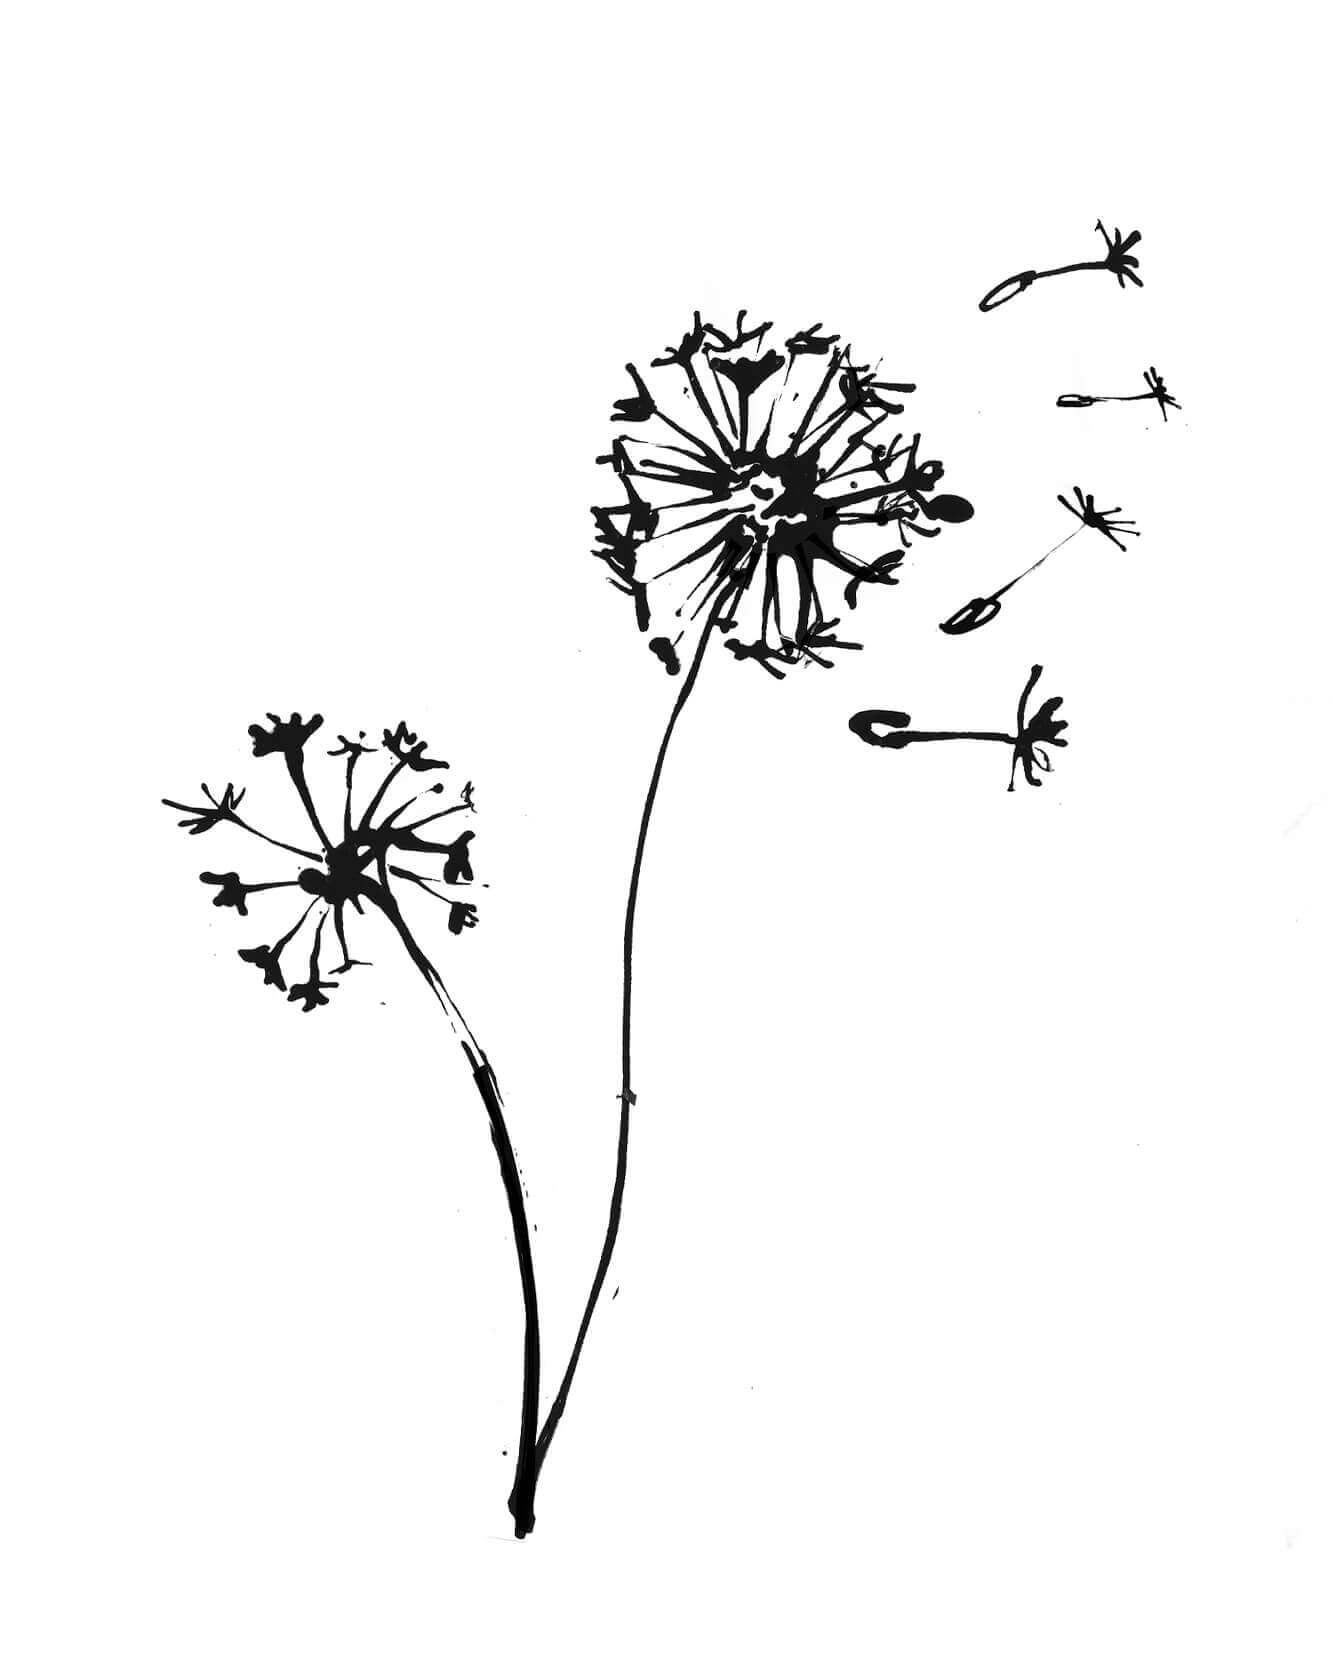 Sketches of a dandelions, and florals. The work in progress for the line artwork for an illustrated label for a hot toddy kit for interior agency Meadquin, part of a pack sent to clients for Christmas. Capturing a dandelion ink ink.A simple line artwork for an illustrated label for a hot toddy kit for interior agency Meadquin, part of a pack sent to clients for Christmas. Capturing a dandelion ink.